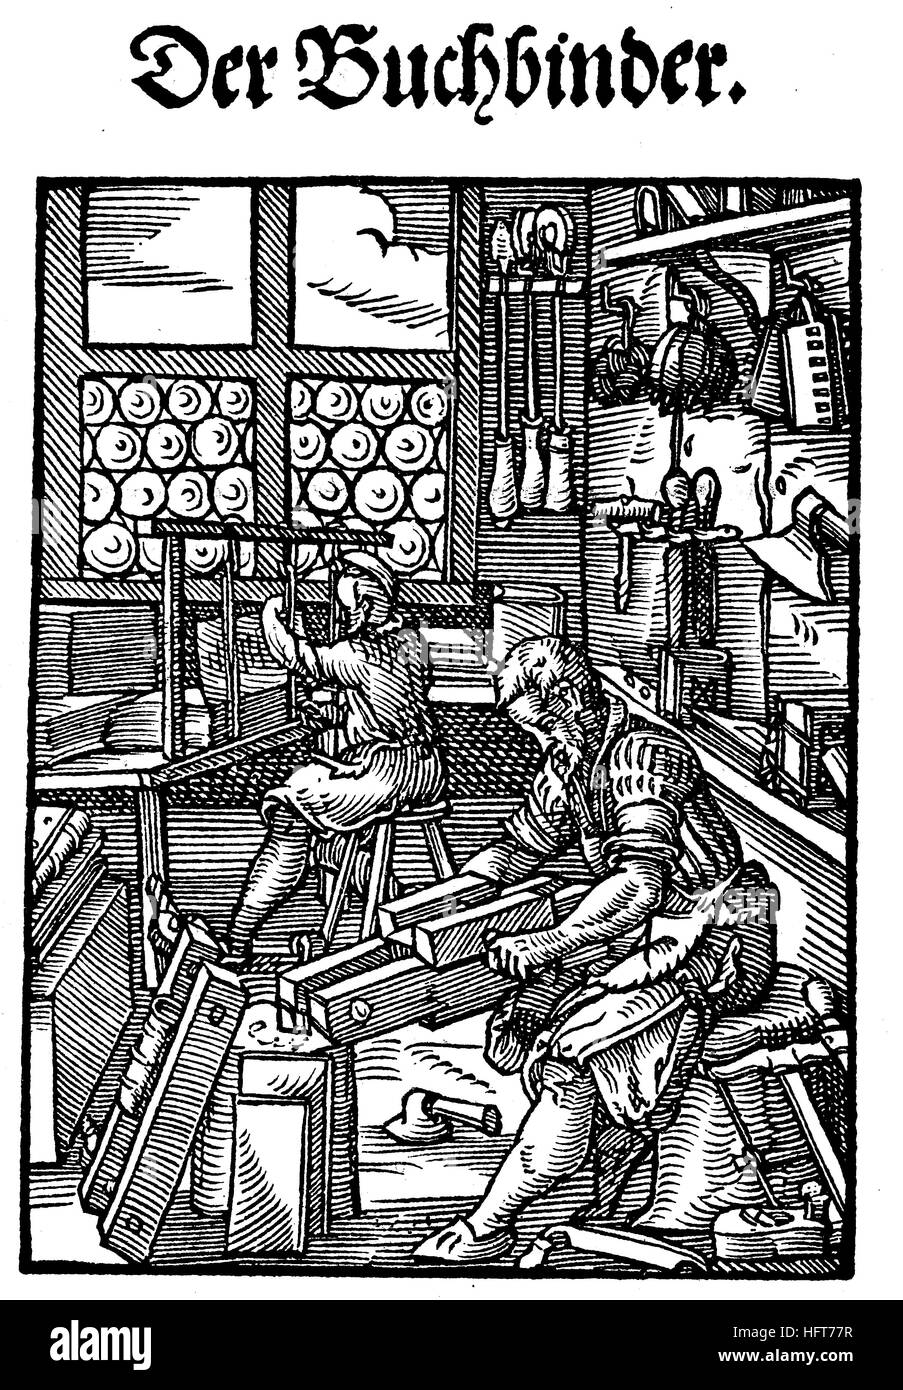 The bookbinder, Der Buchbinder, Woodcut from the, Das Staendebuch, a famous series of woodcuts of the trades by Amman, 1568, Germany, craft, work, craftsman, woodcut from the year 1885, digital improved Stock Photo